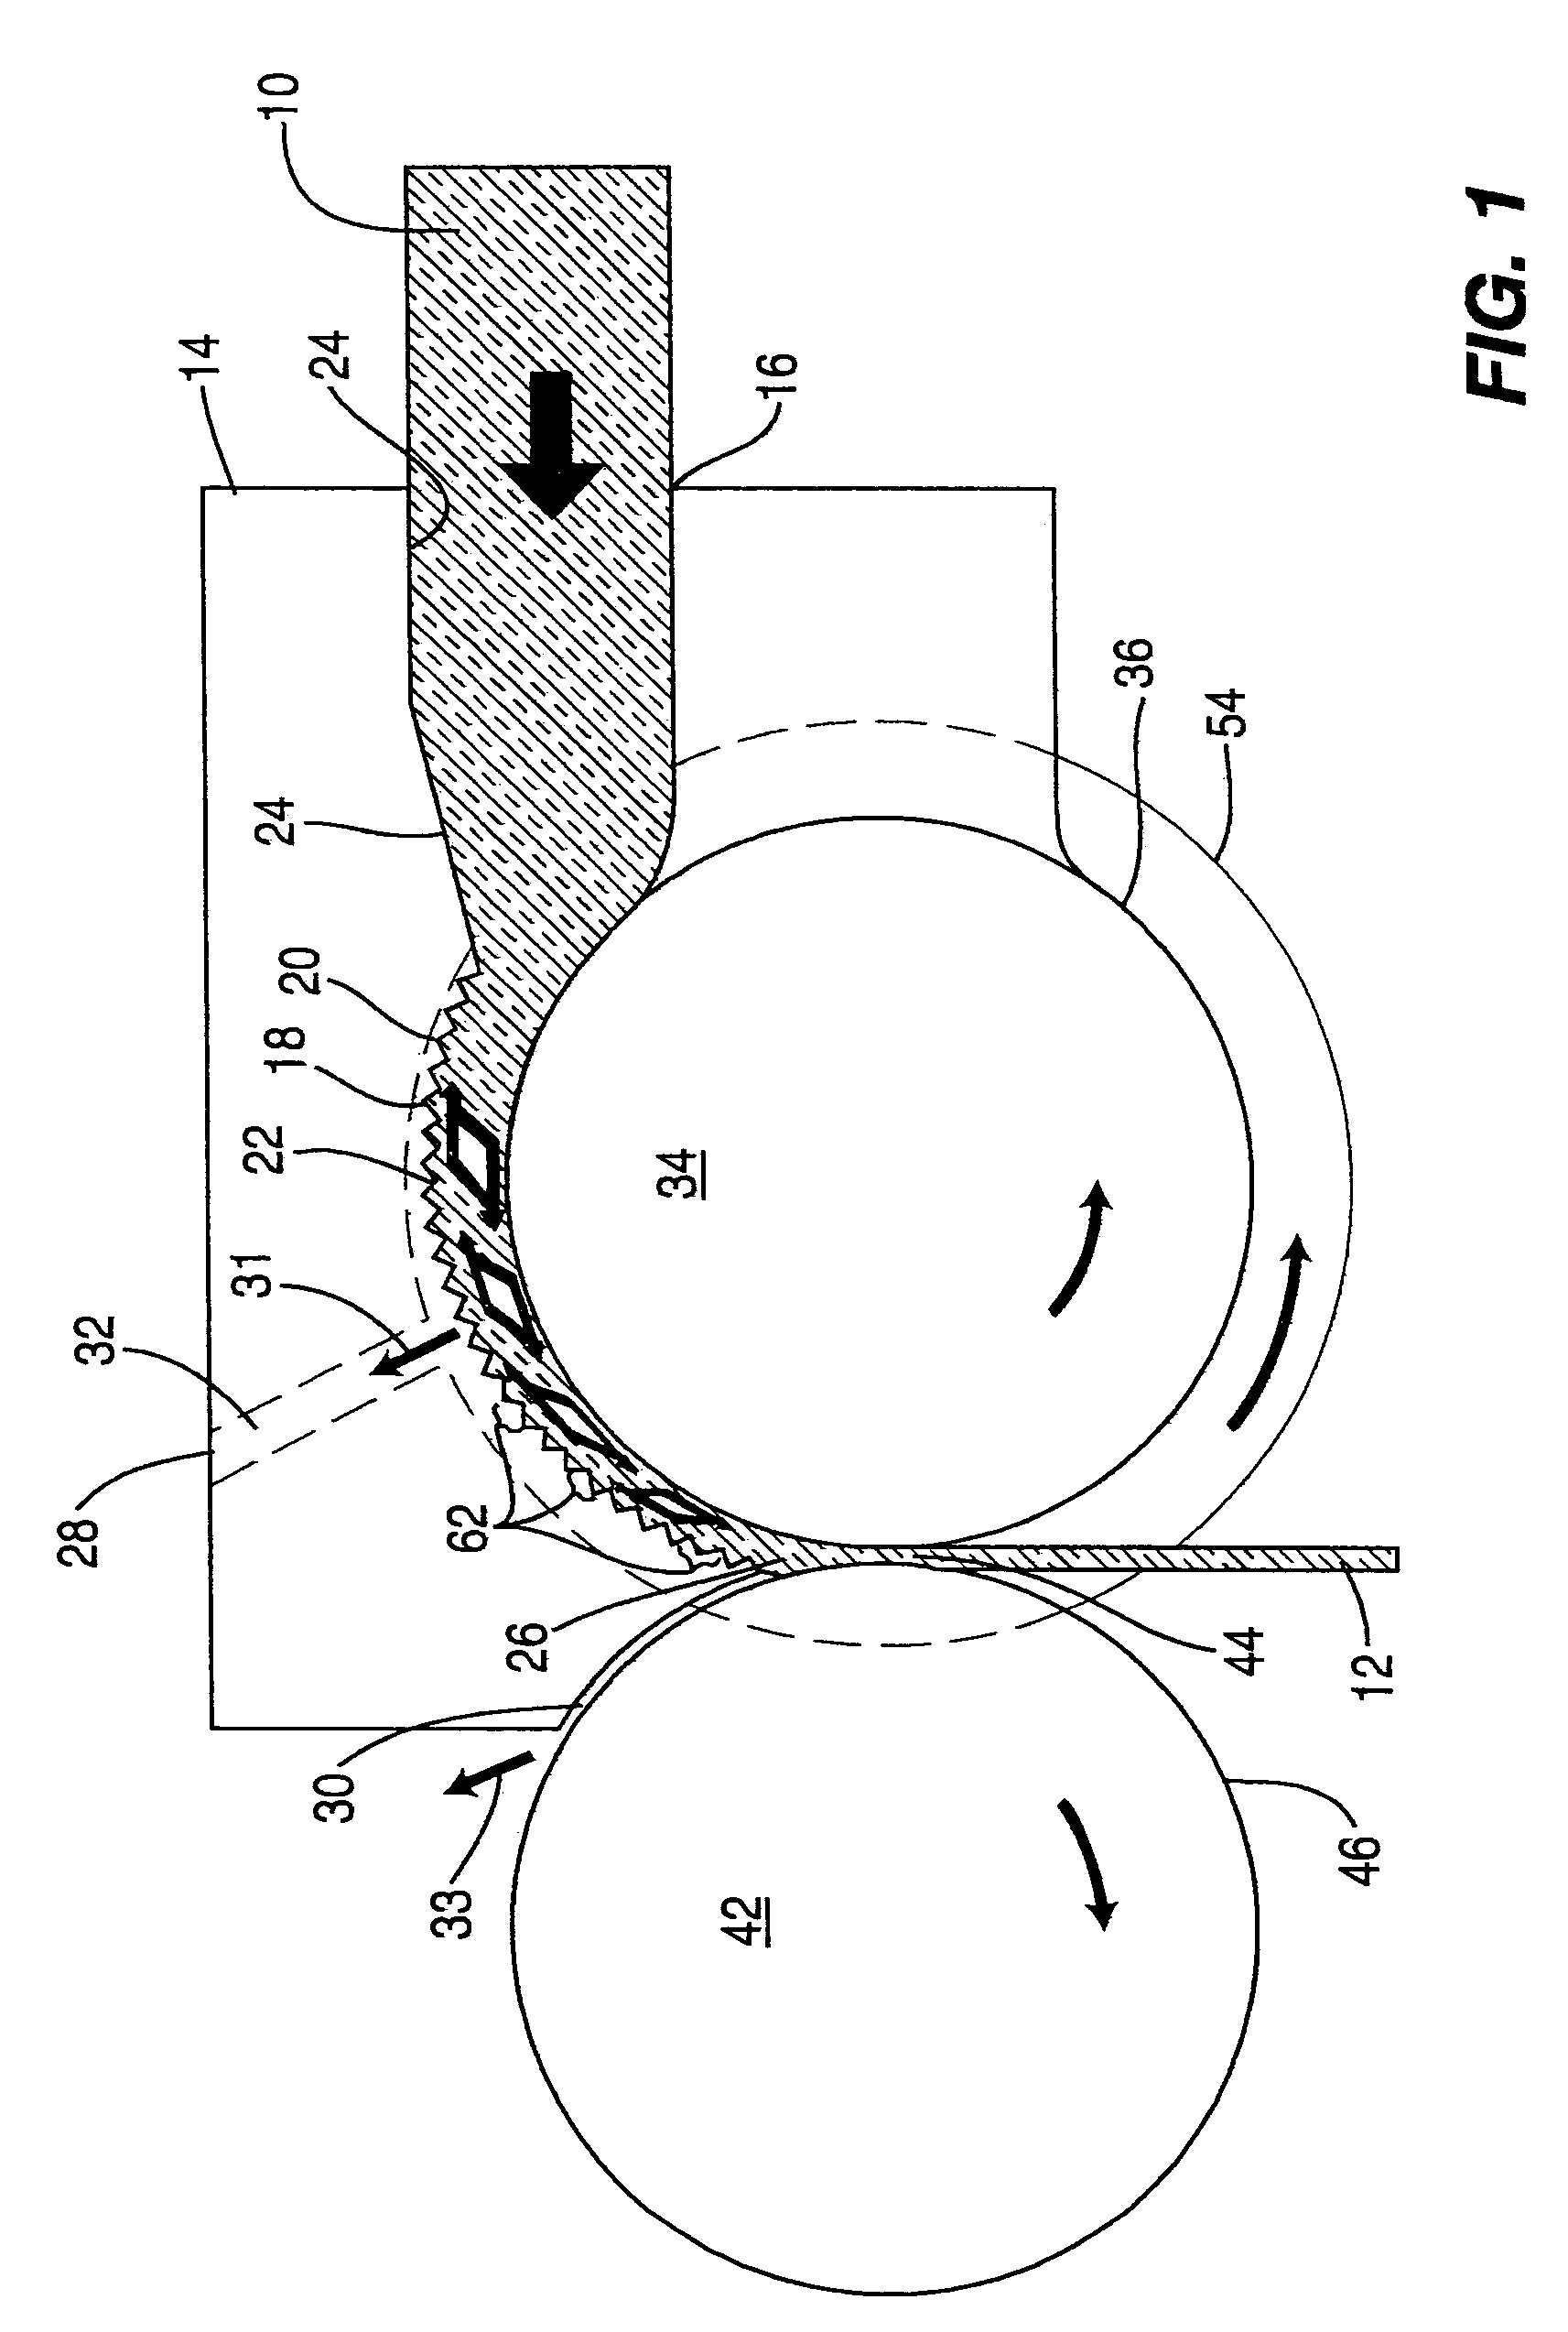 Powder compacting apparatus for continuous pressing of pharmaceutical powder